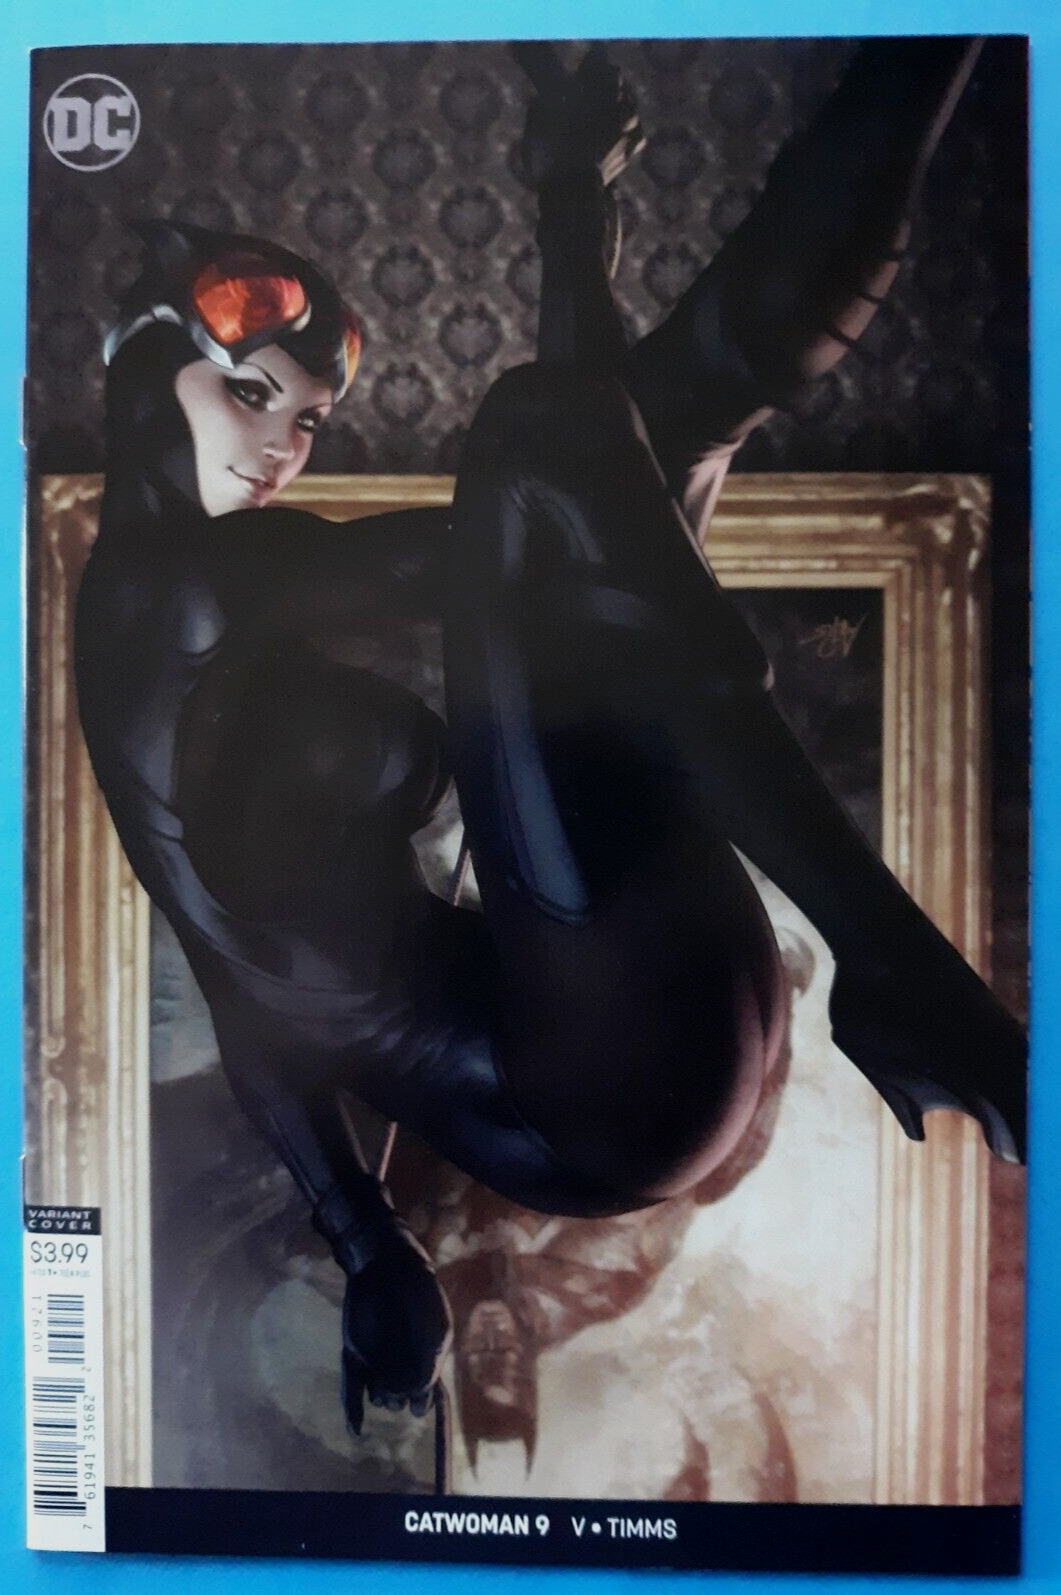 CATWOMAN #9 (2019 DC) ARTGERM CATWOMAN VARIANT COVER *FREE SHIPPING*